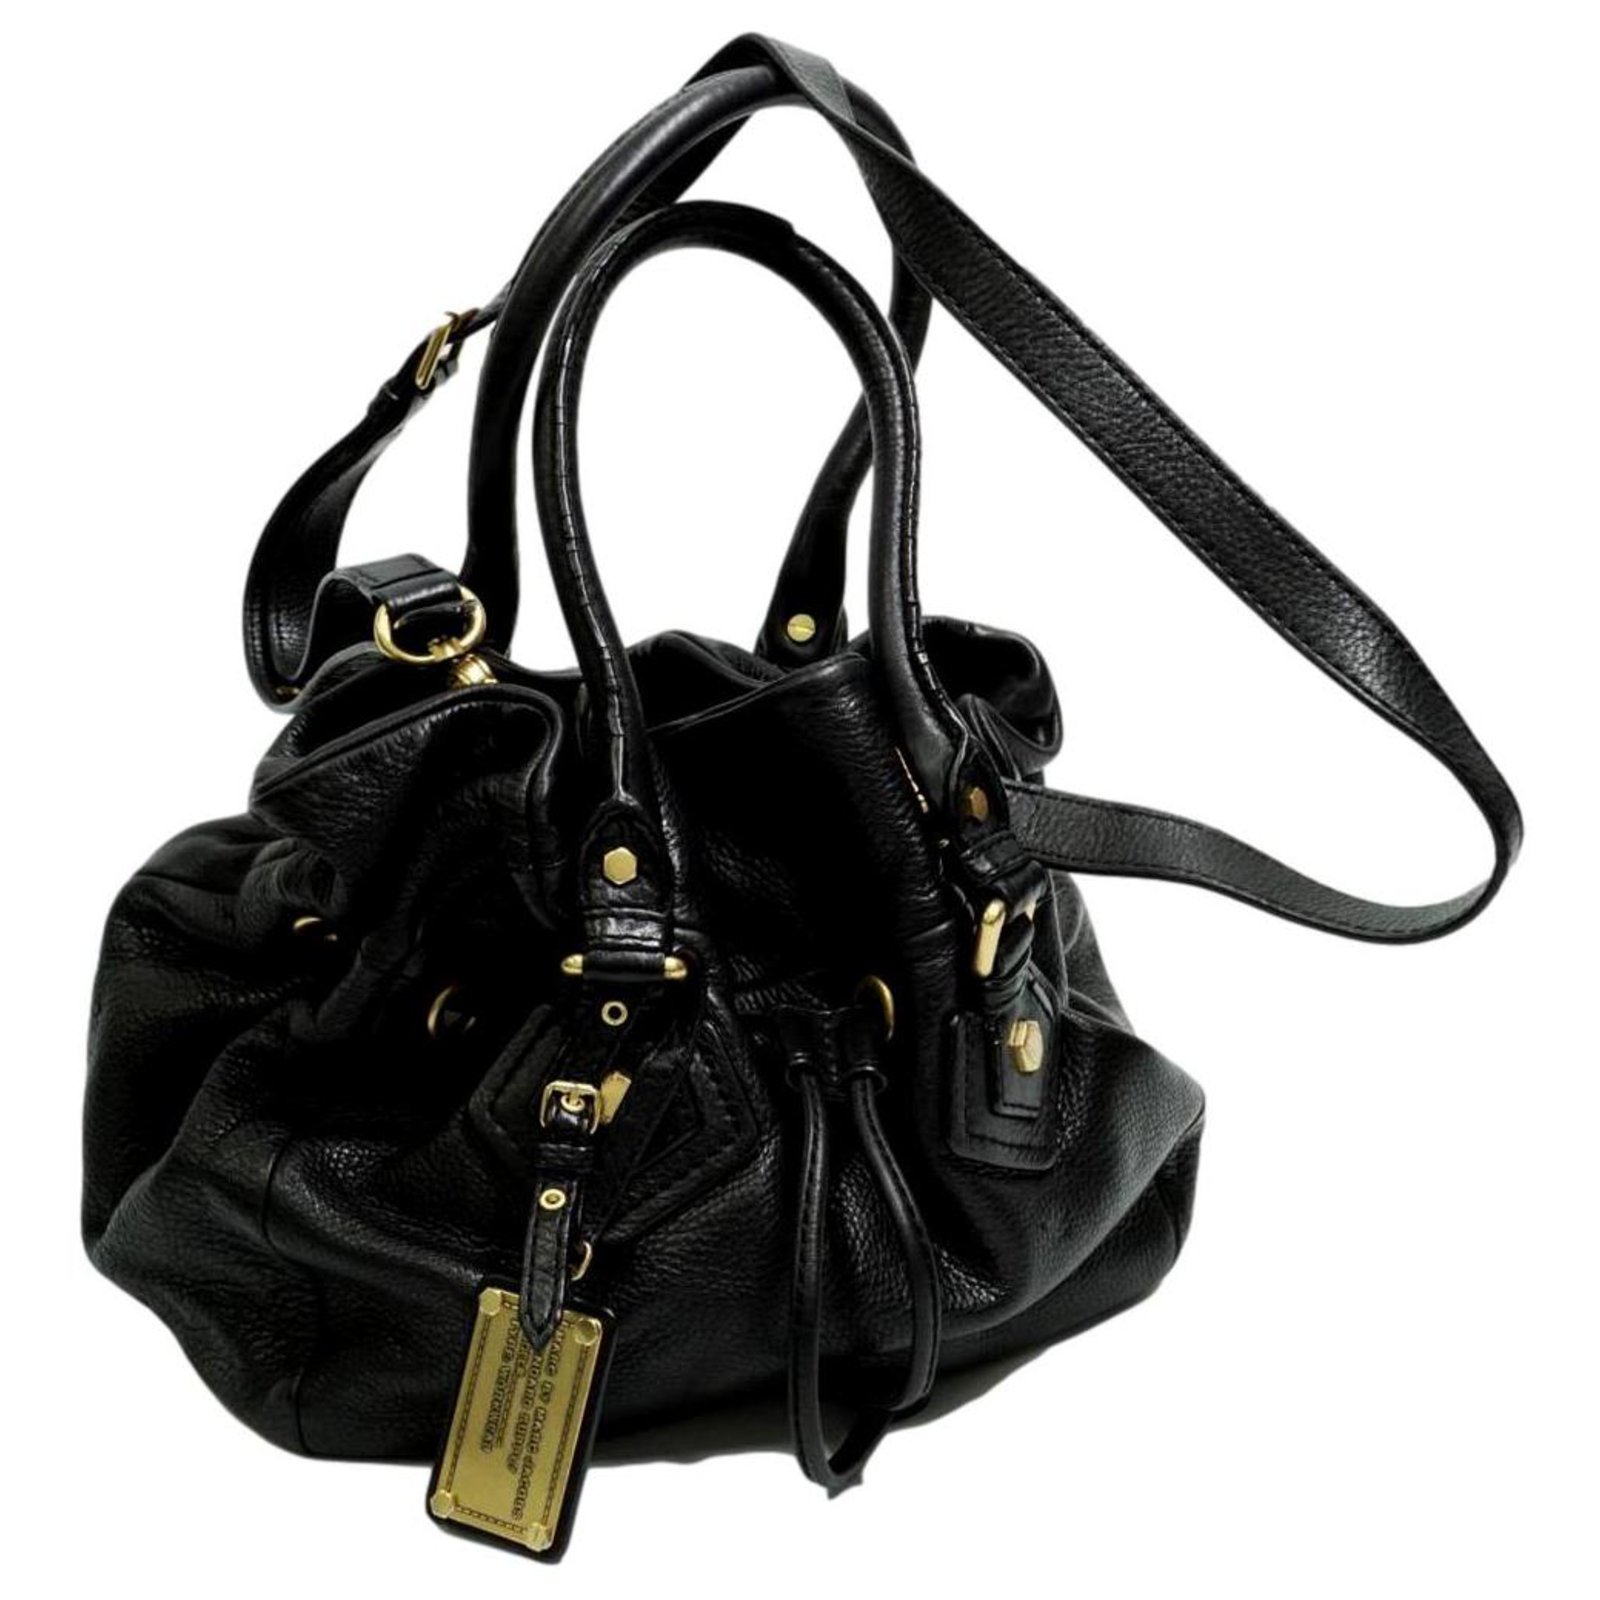 Classic q leather crossbody bag Marc by Marc Jacobs Black in